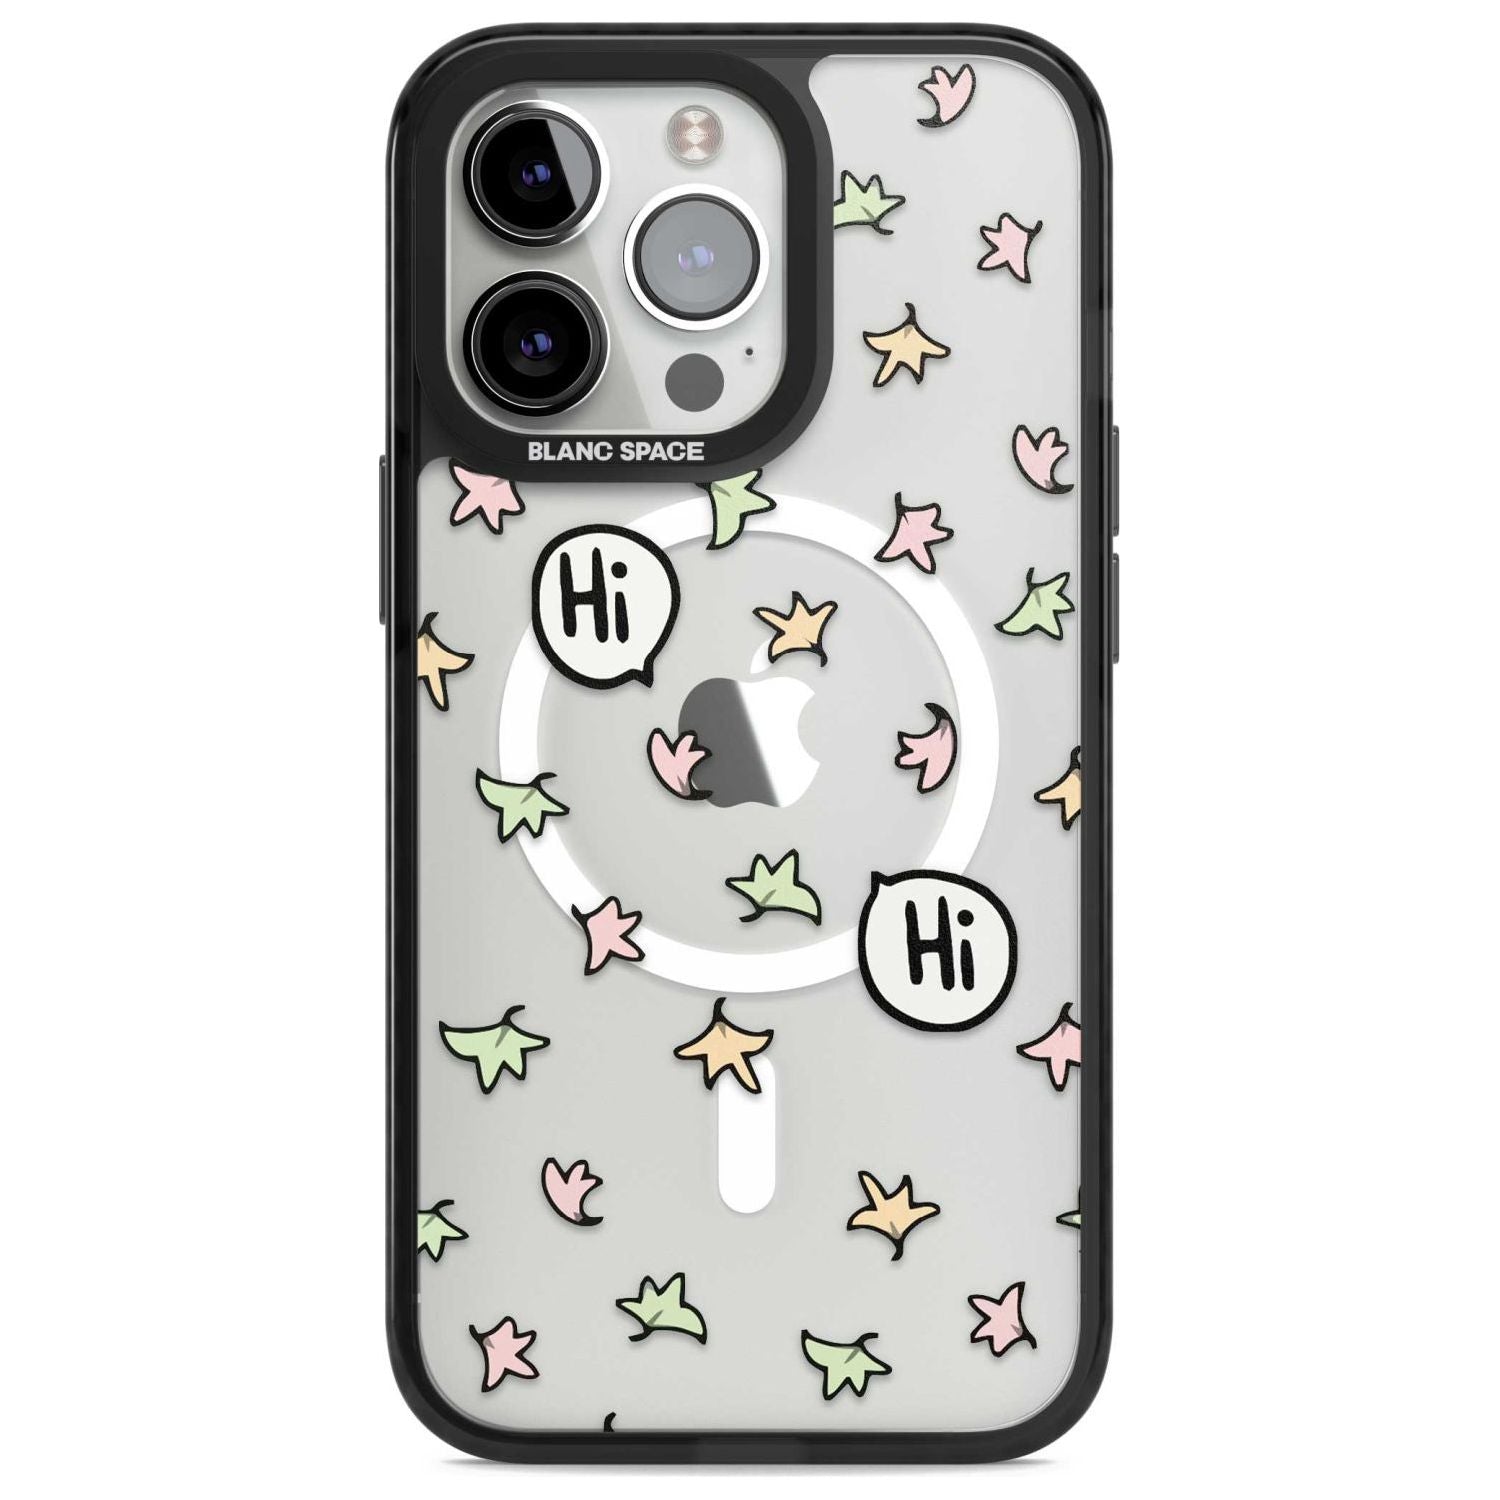 Heartstopper Leaves Pattern Phone Case iPhone 15 Pro Max / Magsafe Black Impact Case,iPhone 15 Pro / Magsafe Black Impact Case,iPhone 14 Pro Max / Magsafe Black Impact Case,iPhone 14 Pro / Magsafe Black Impact Case,iPhone 13 Pro / Magsafe Black Impact Case Blanc Space